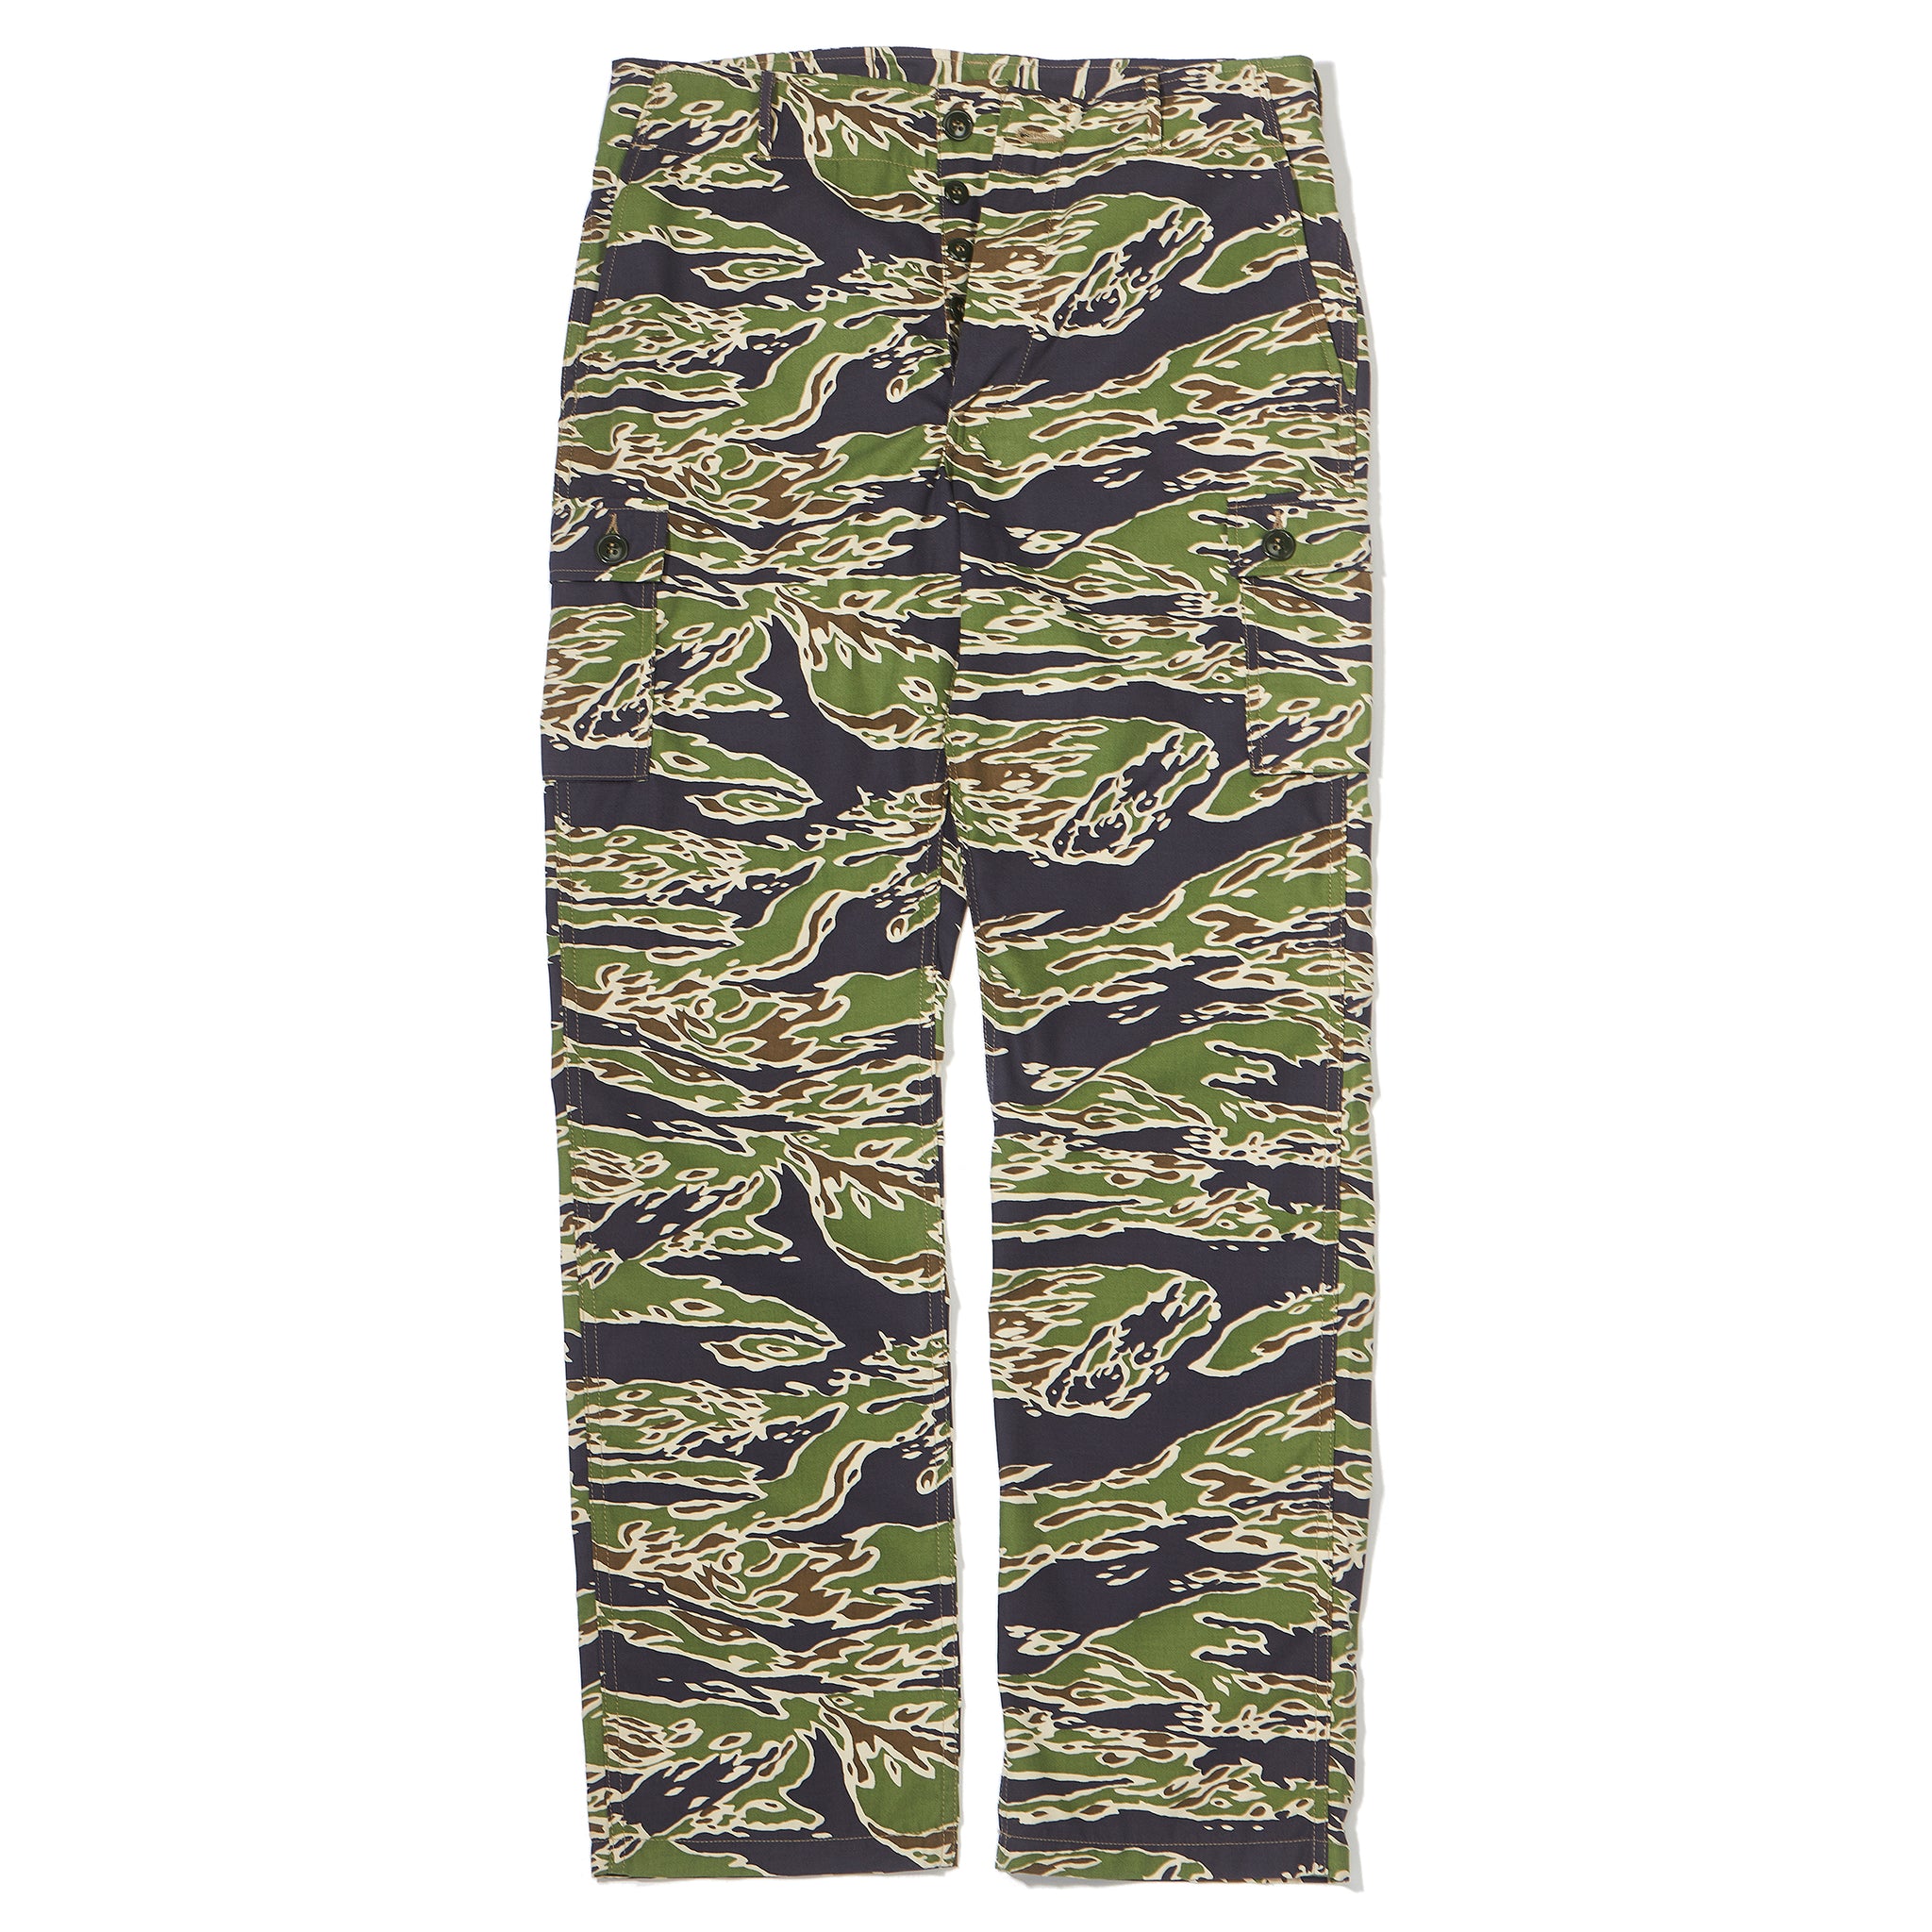 TIGER CAMOUFLAGE TROUSERS / LATE WAR – The Real McCoy's